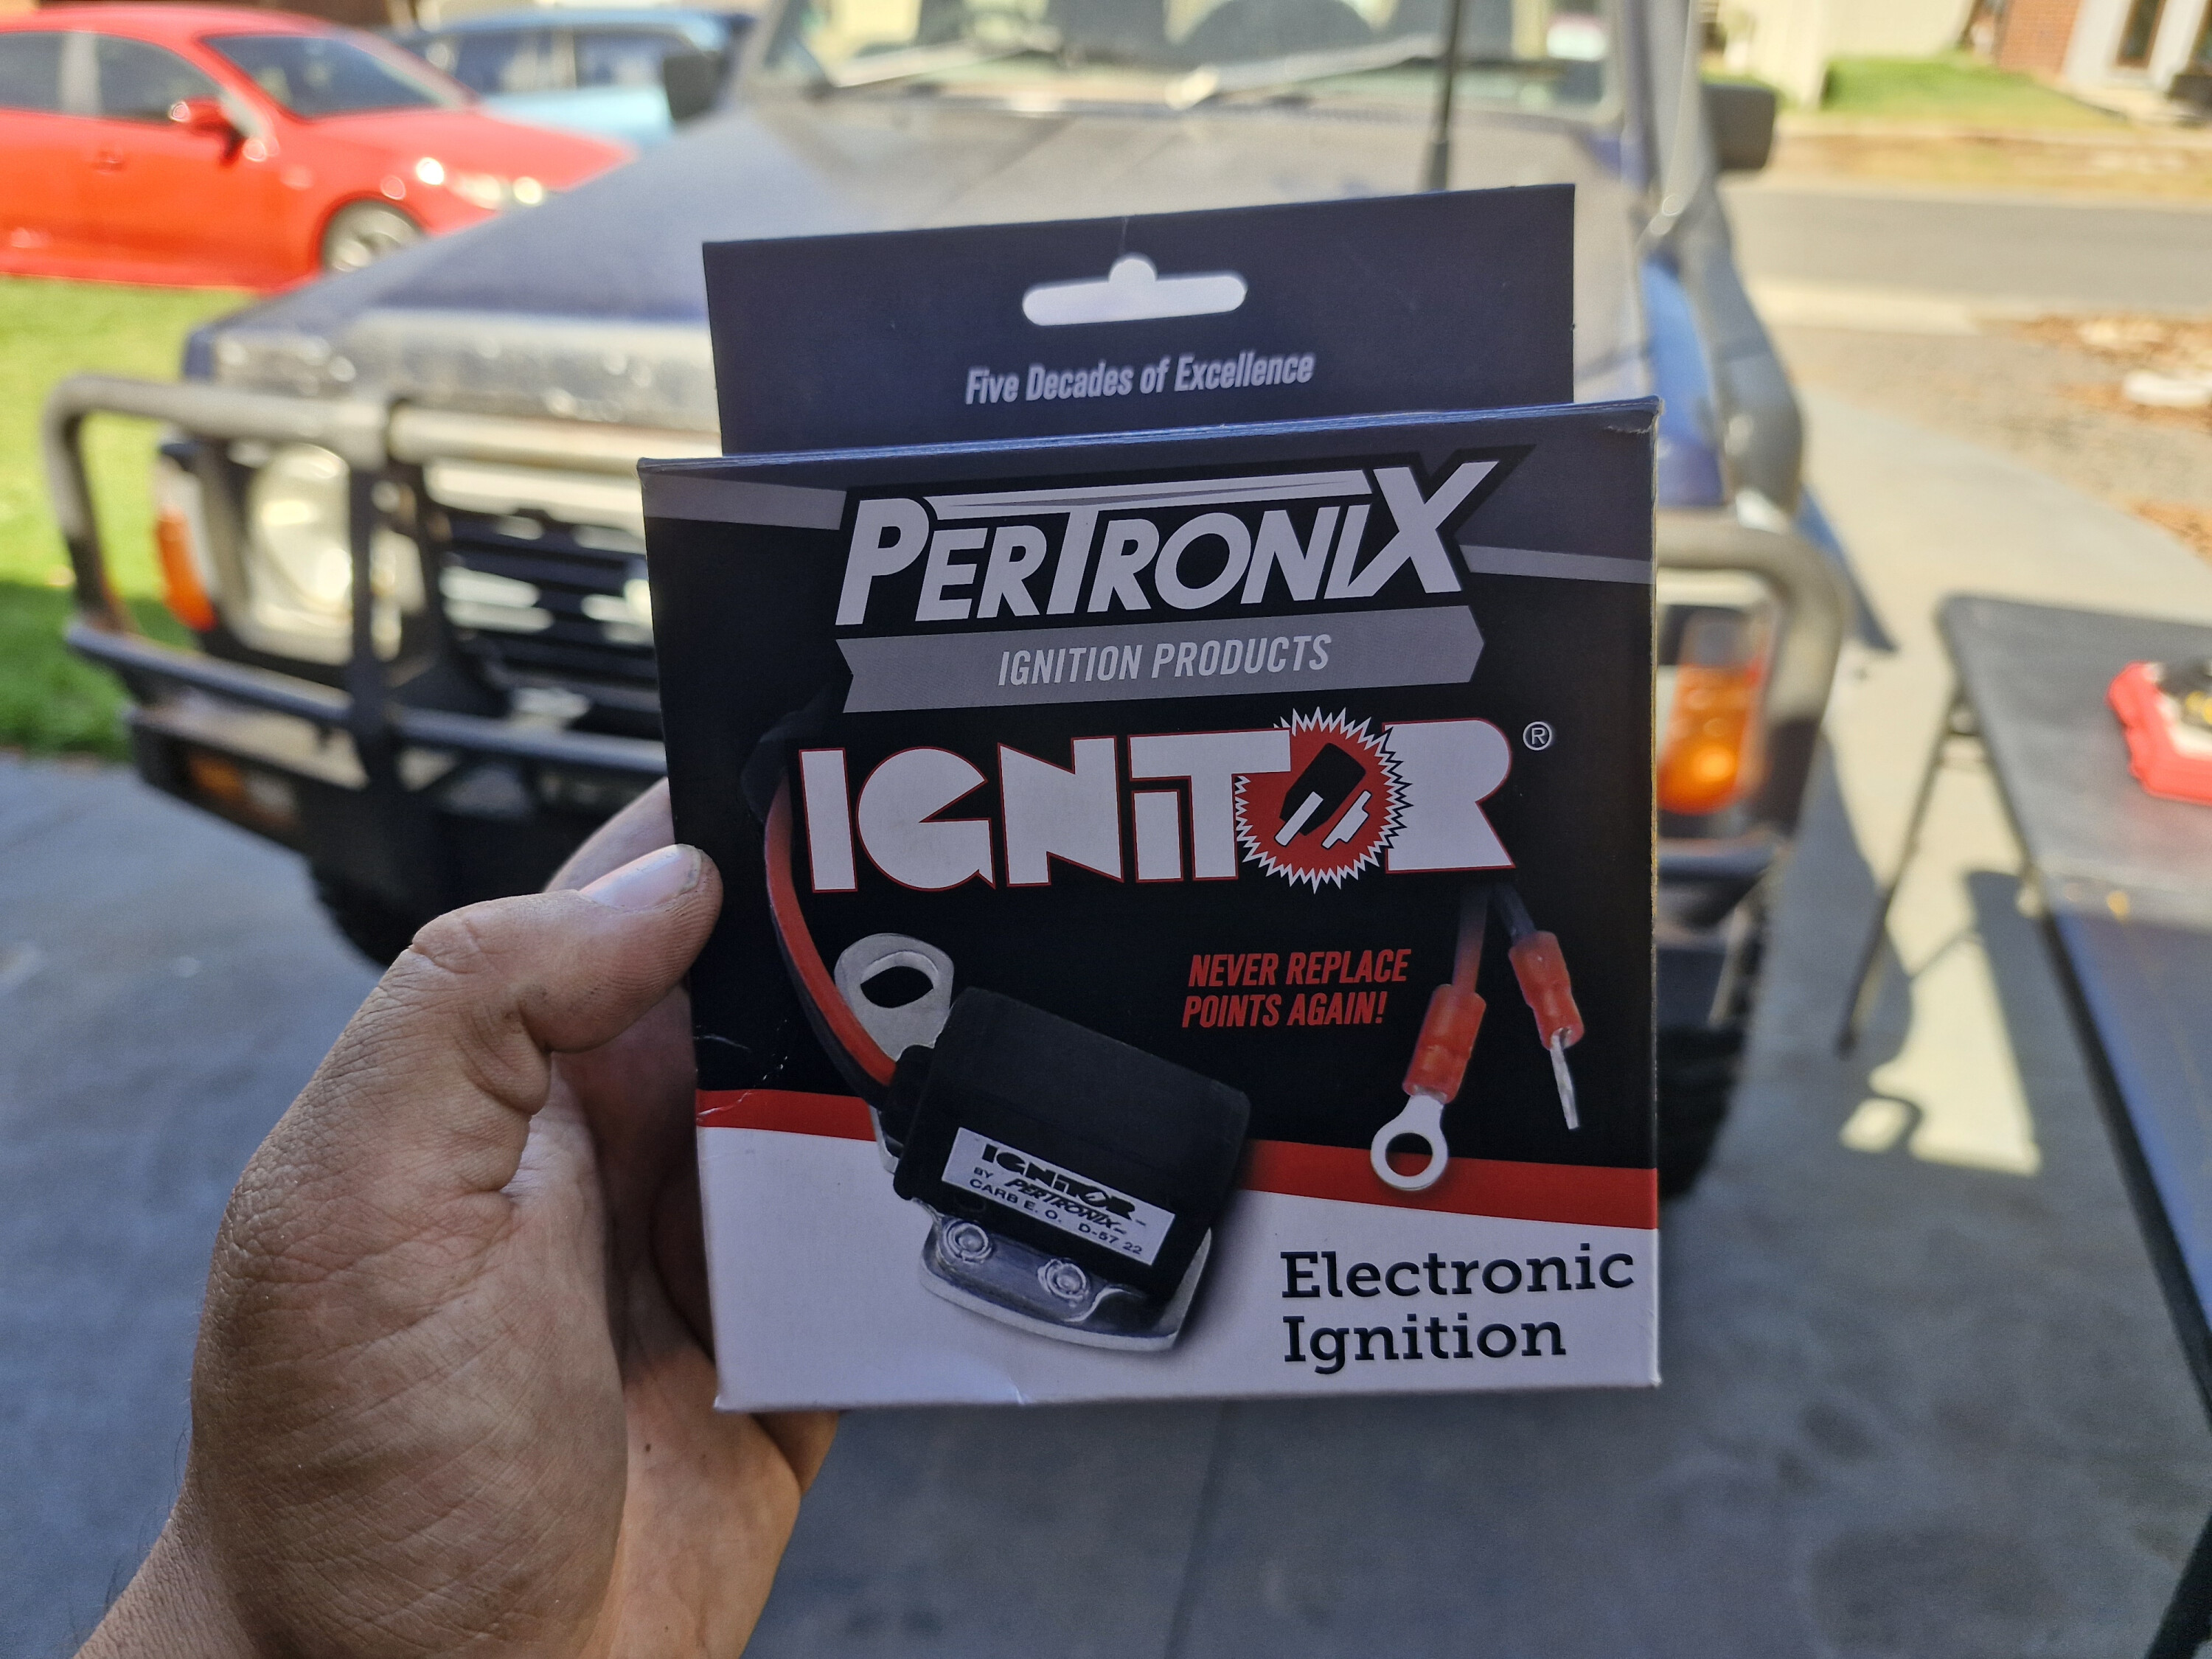 95f214a5/pertronix electronic ignition 9 jpg